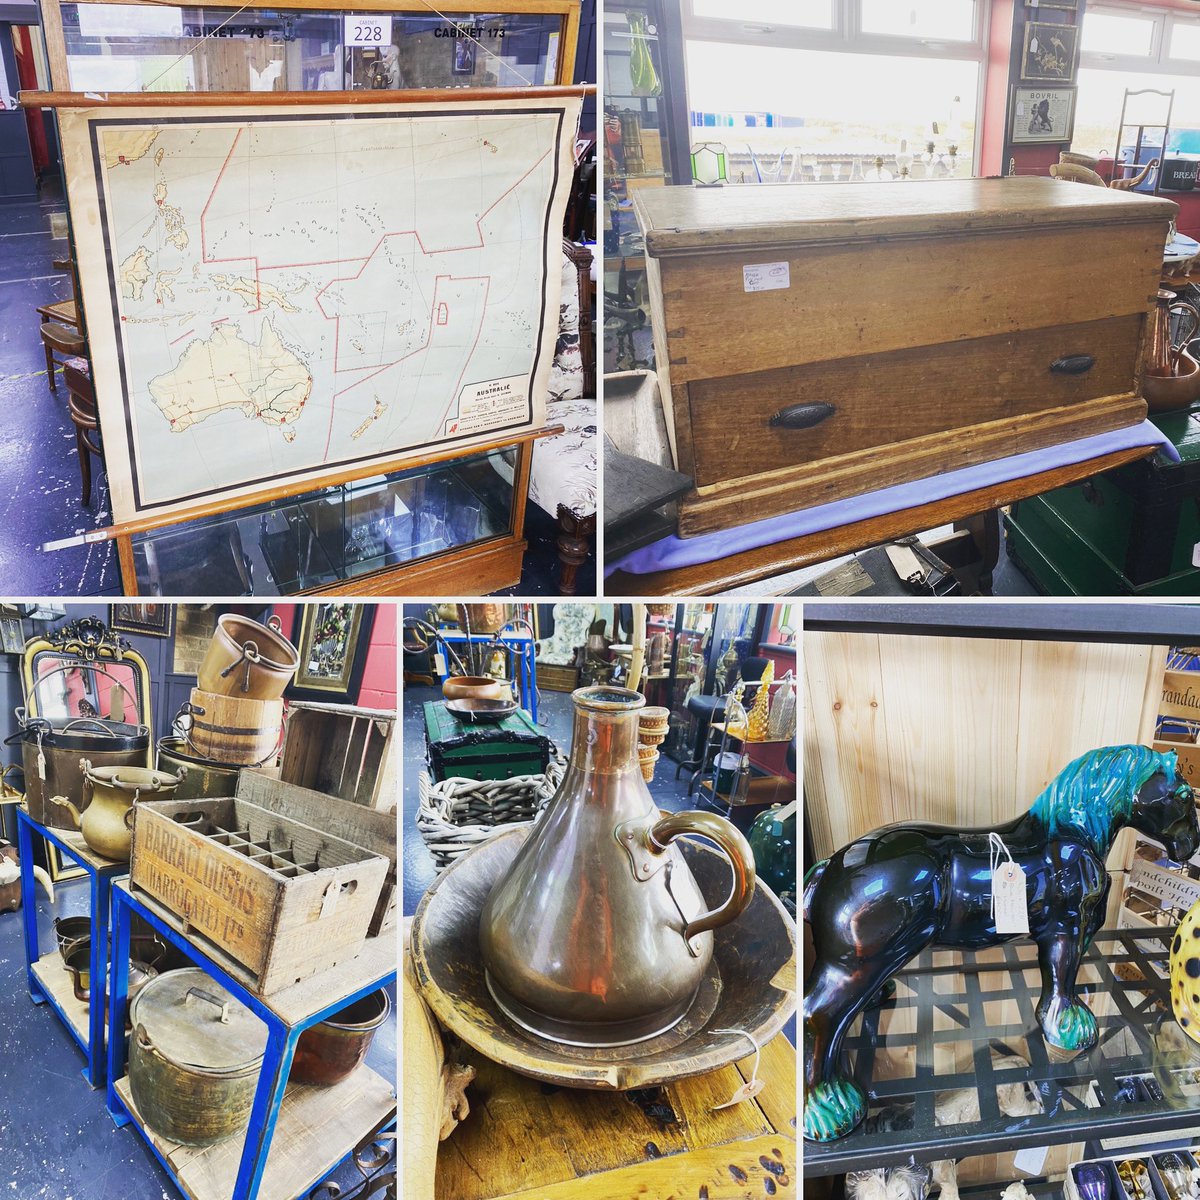 Unit 228 has a great selection of antique and vintage items. Here until 5pm 
#vintagemap #pinechest #copper #brass #advertisingcrates #ornatemirror #astraantiquescentre #hemswell #lincolnshire